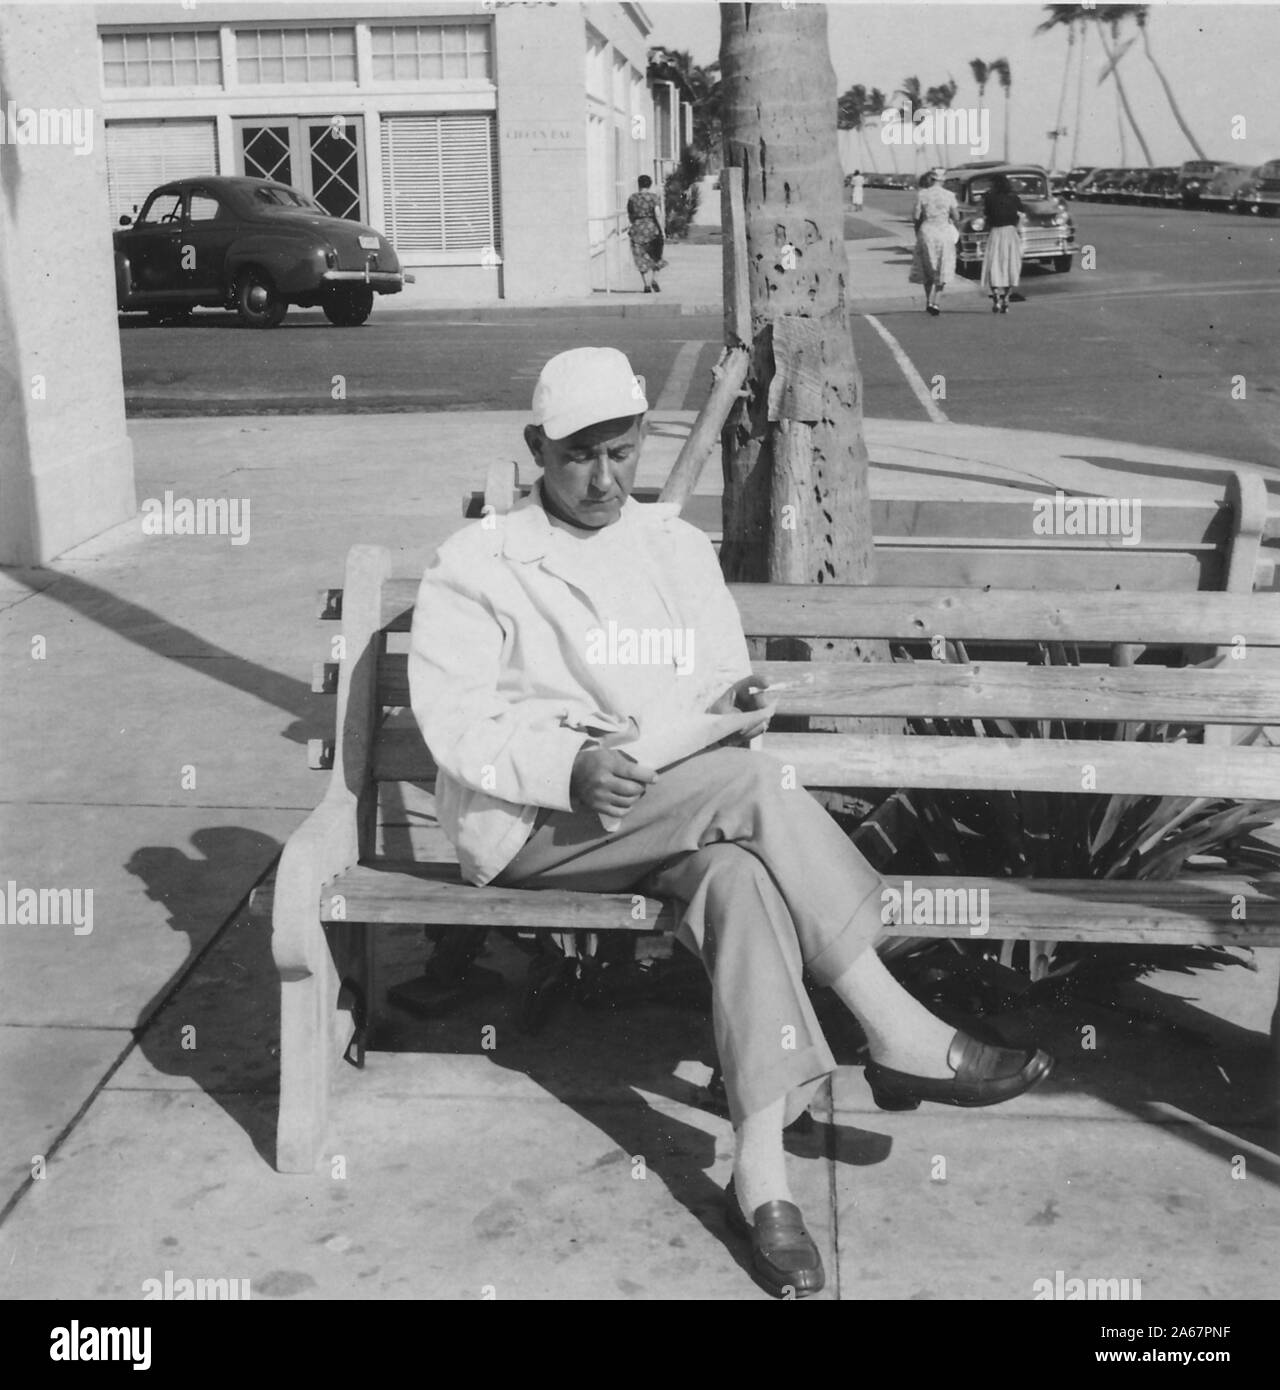 A Jewish-American man sits outdoors on a bench and reads a paper, with cars and stores visible in the background, 1940. () Stock Photo